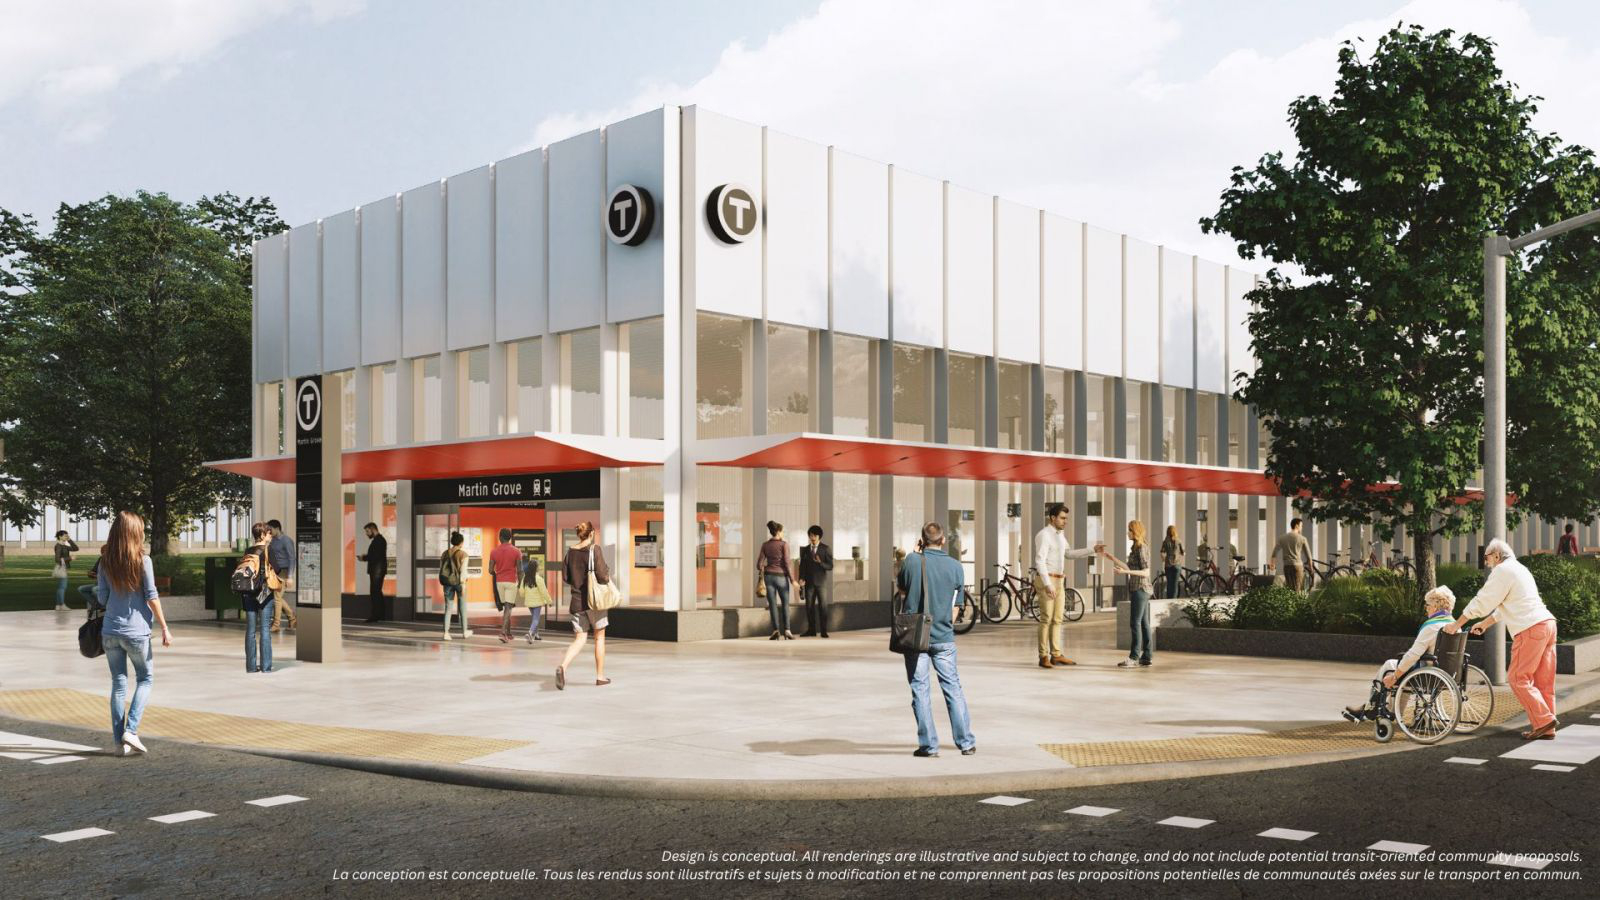 Conceptual rendering showing a street-level view of the future Martin Grove Station